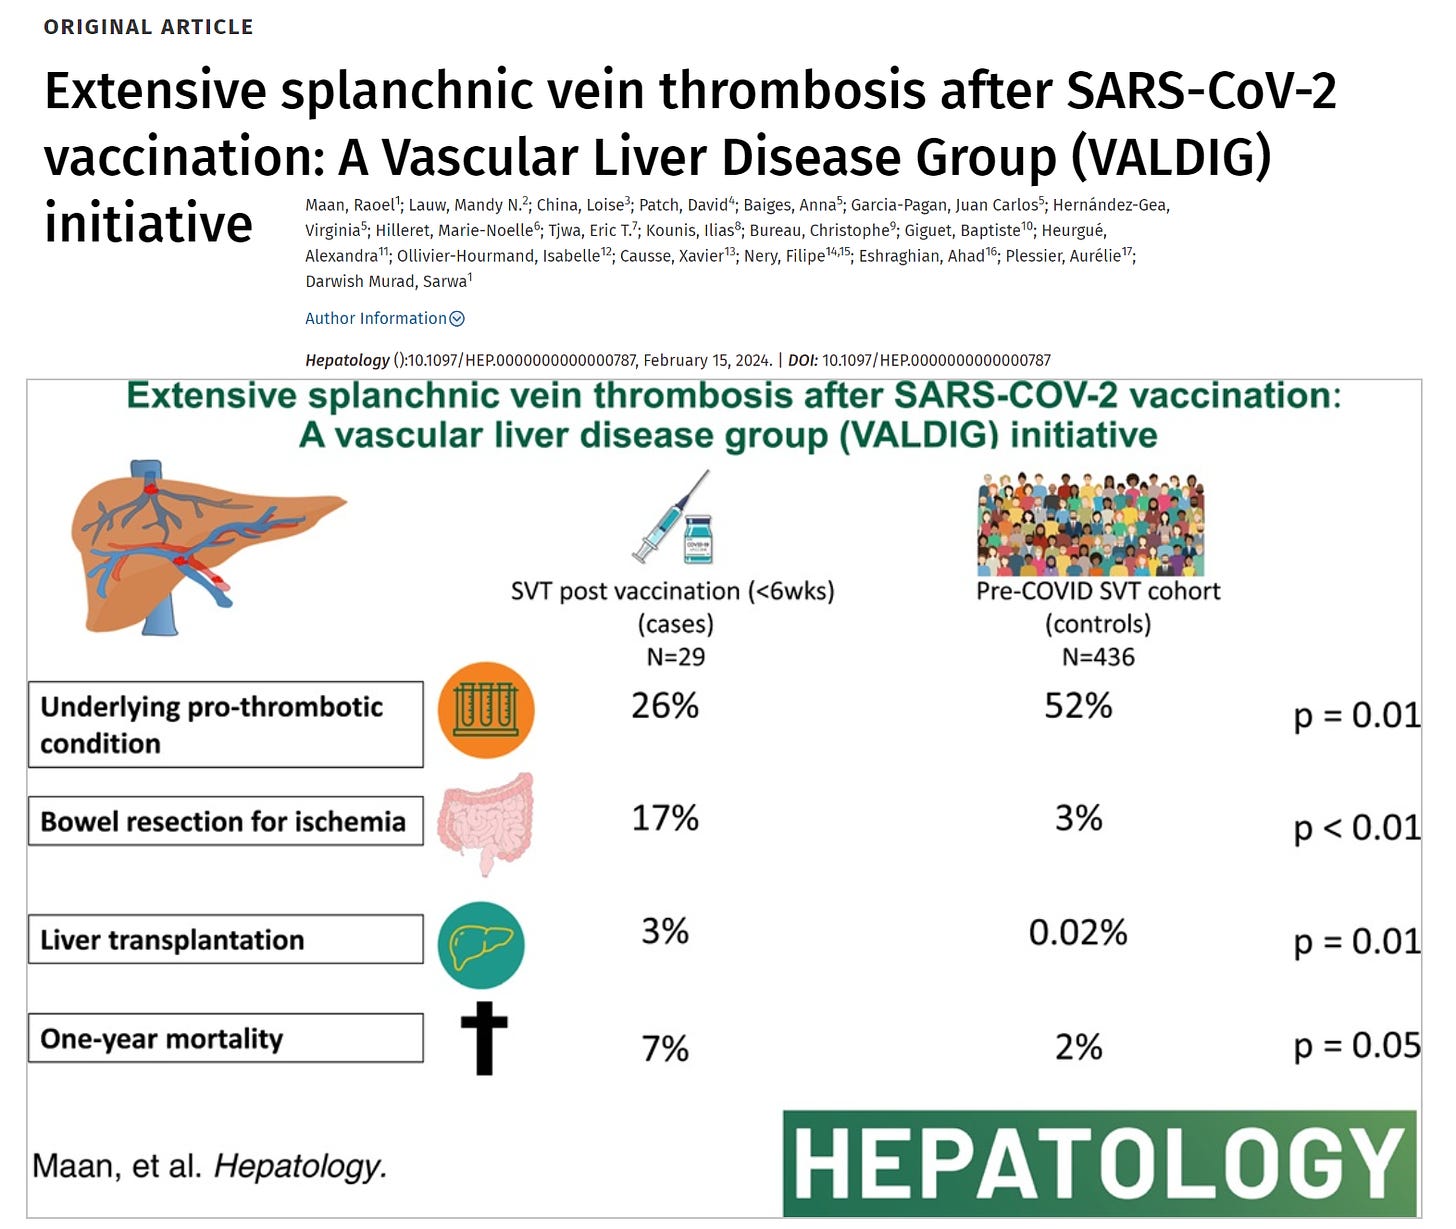 Splanchnic Venous Thrombi after COVID-19 Vaccination